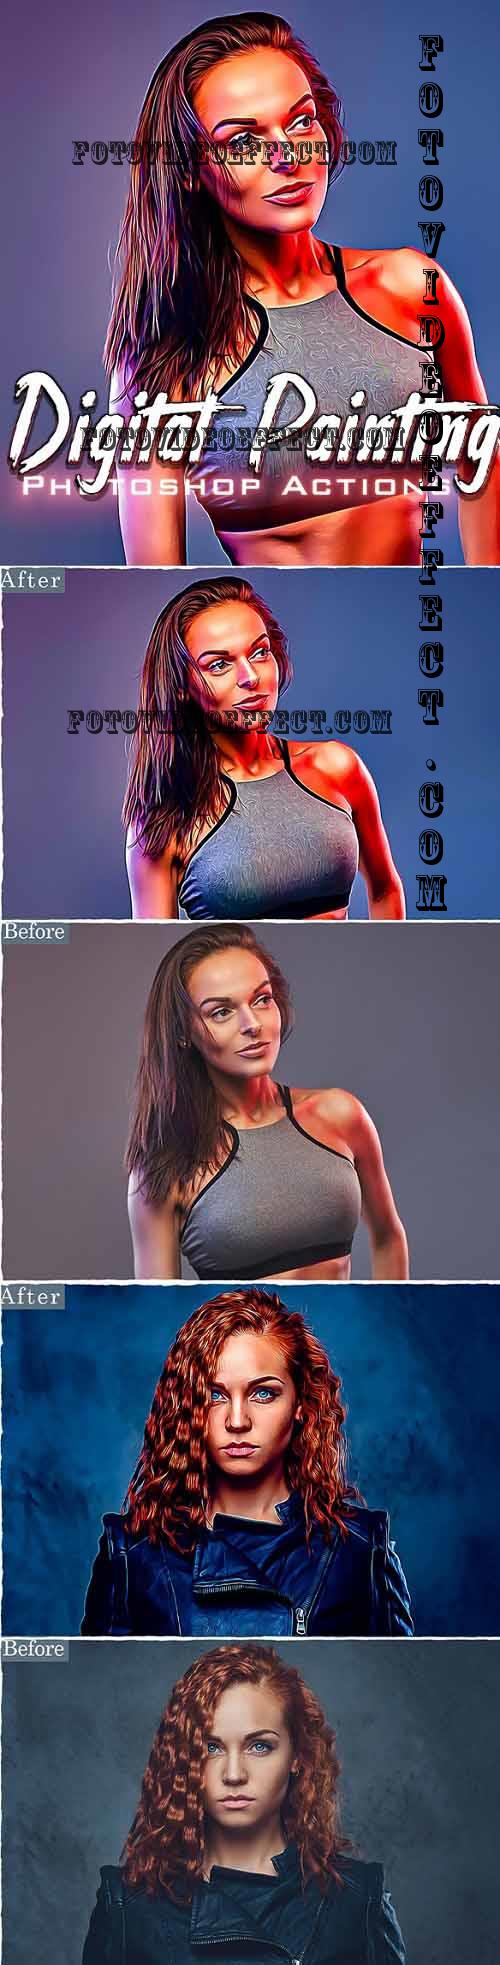 Digital Painting Photoshop Actions - 37148191